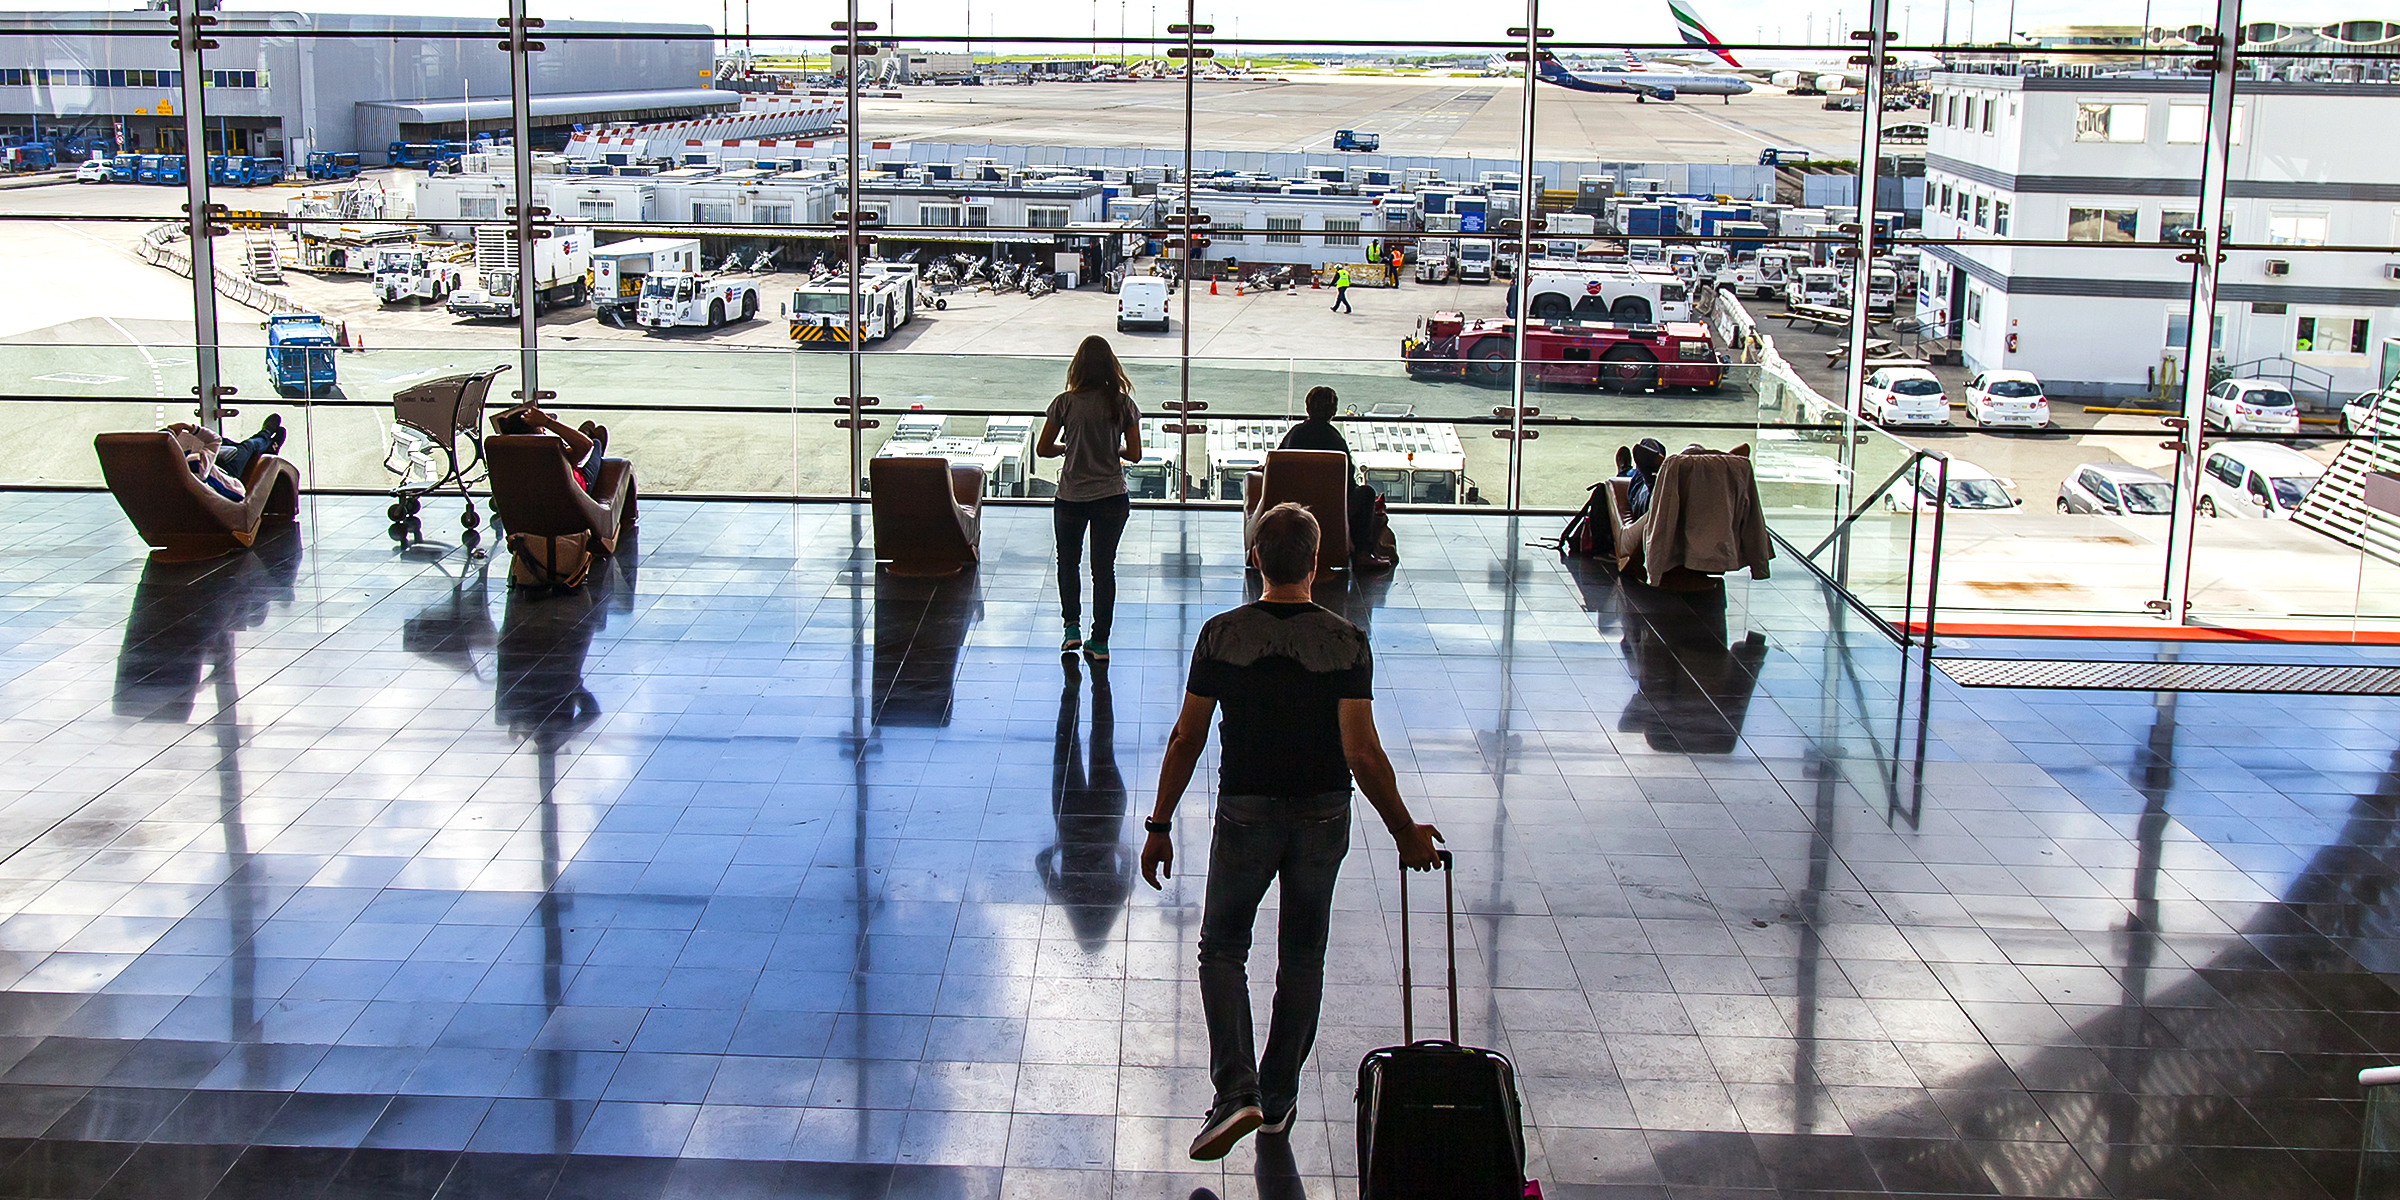 Travelers at Charles de Gaulle Airport | Source: Shutterstock